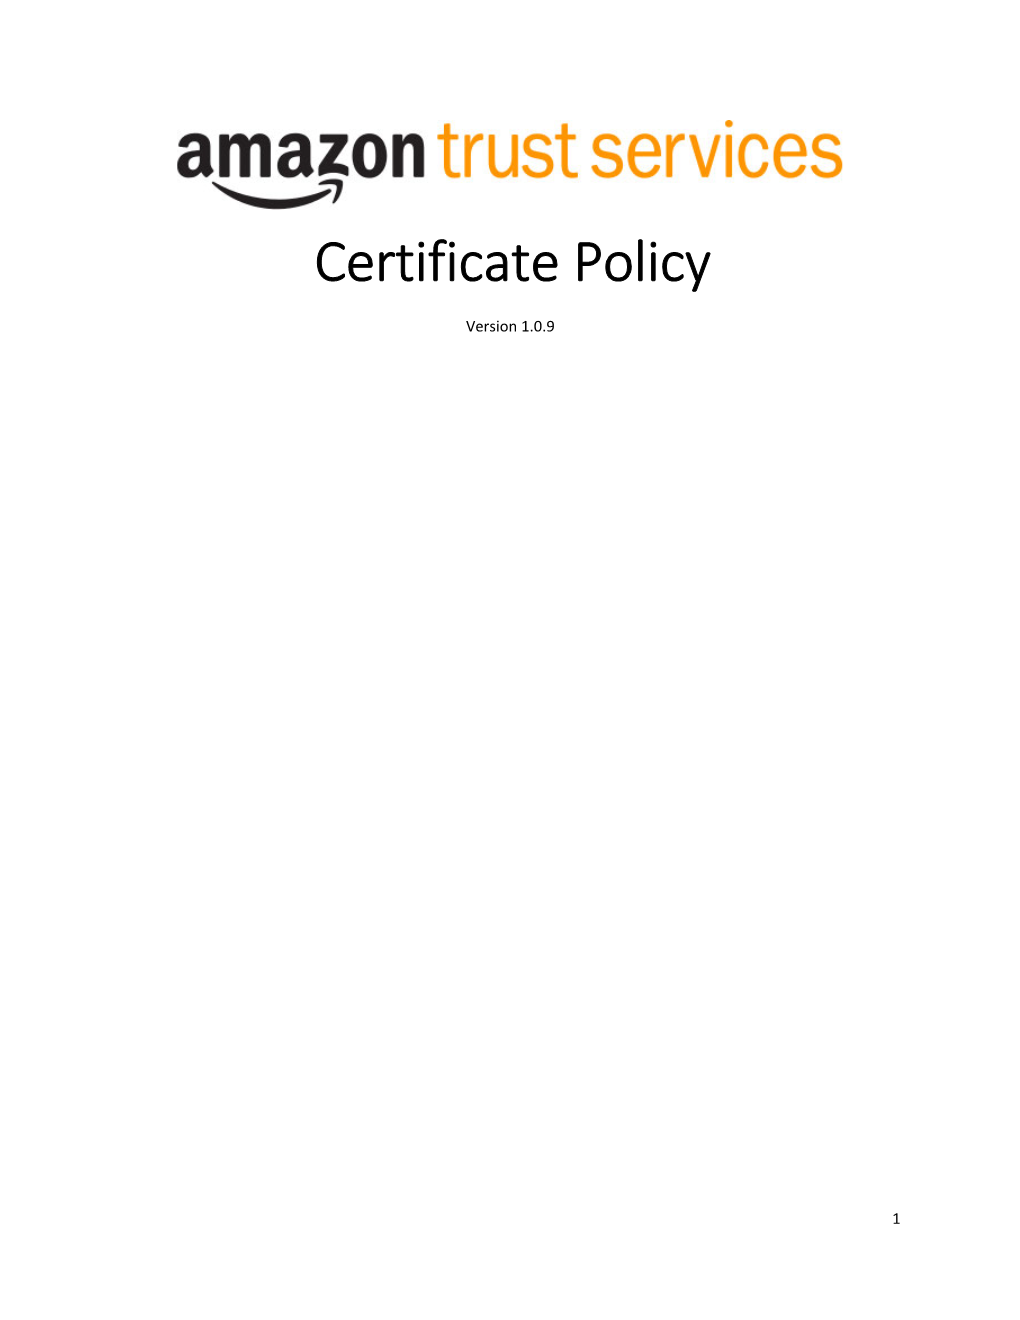 Amazon Trust Services Certificate Policy